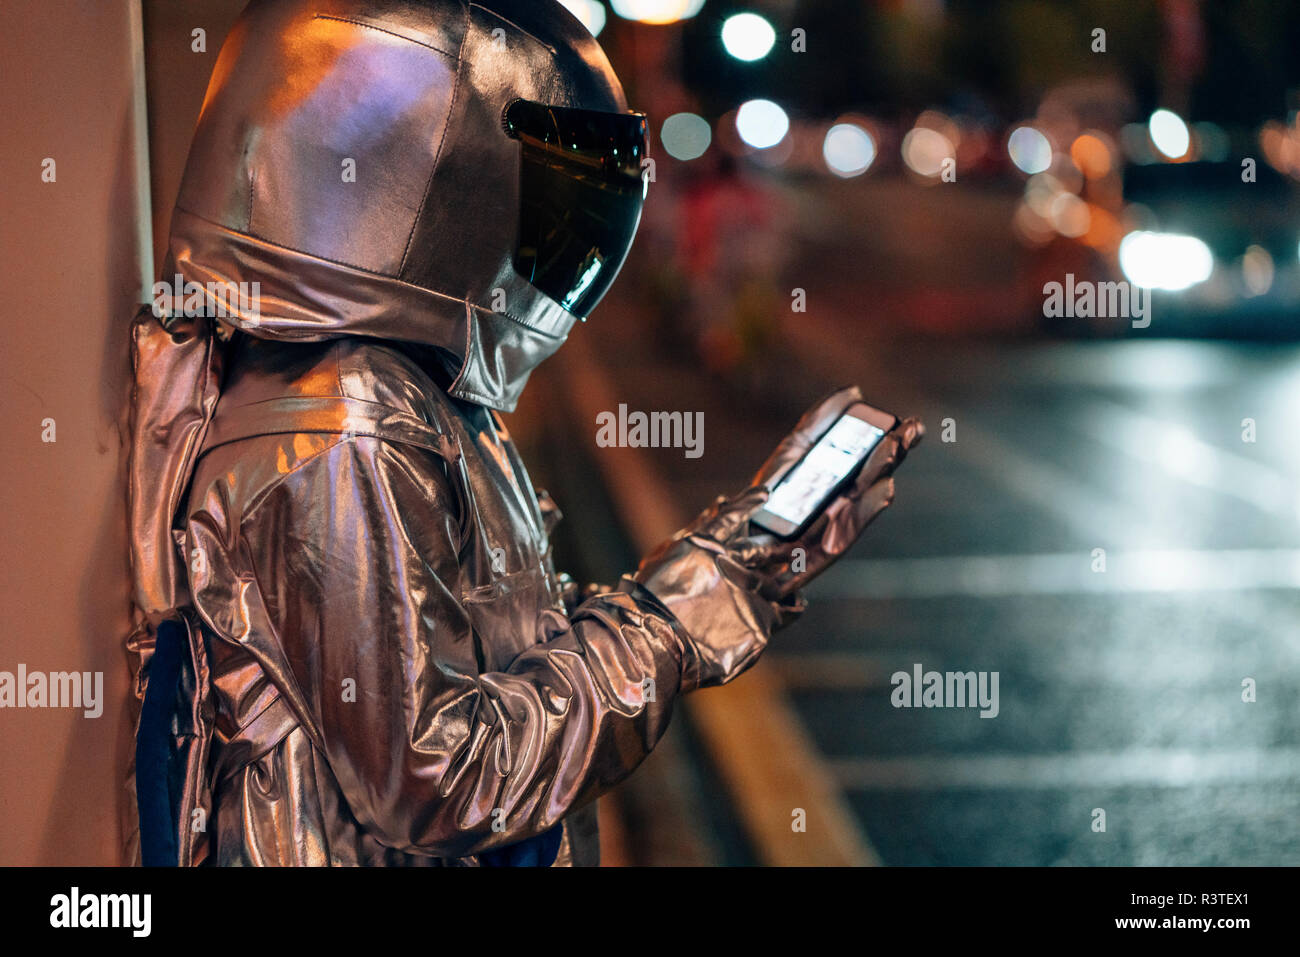 Spaceman at a city street at night using cell phone Stock Photo